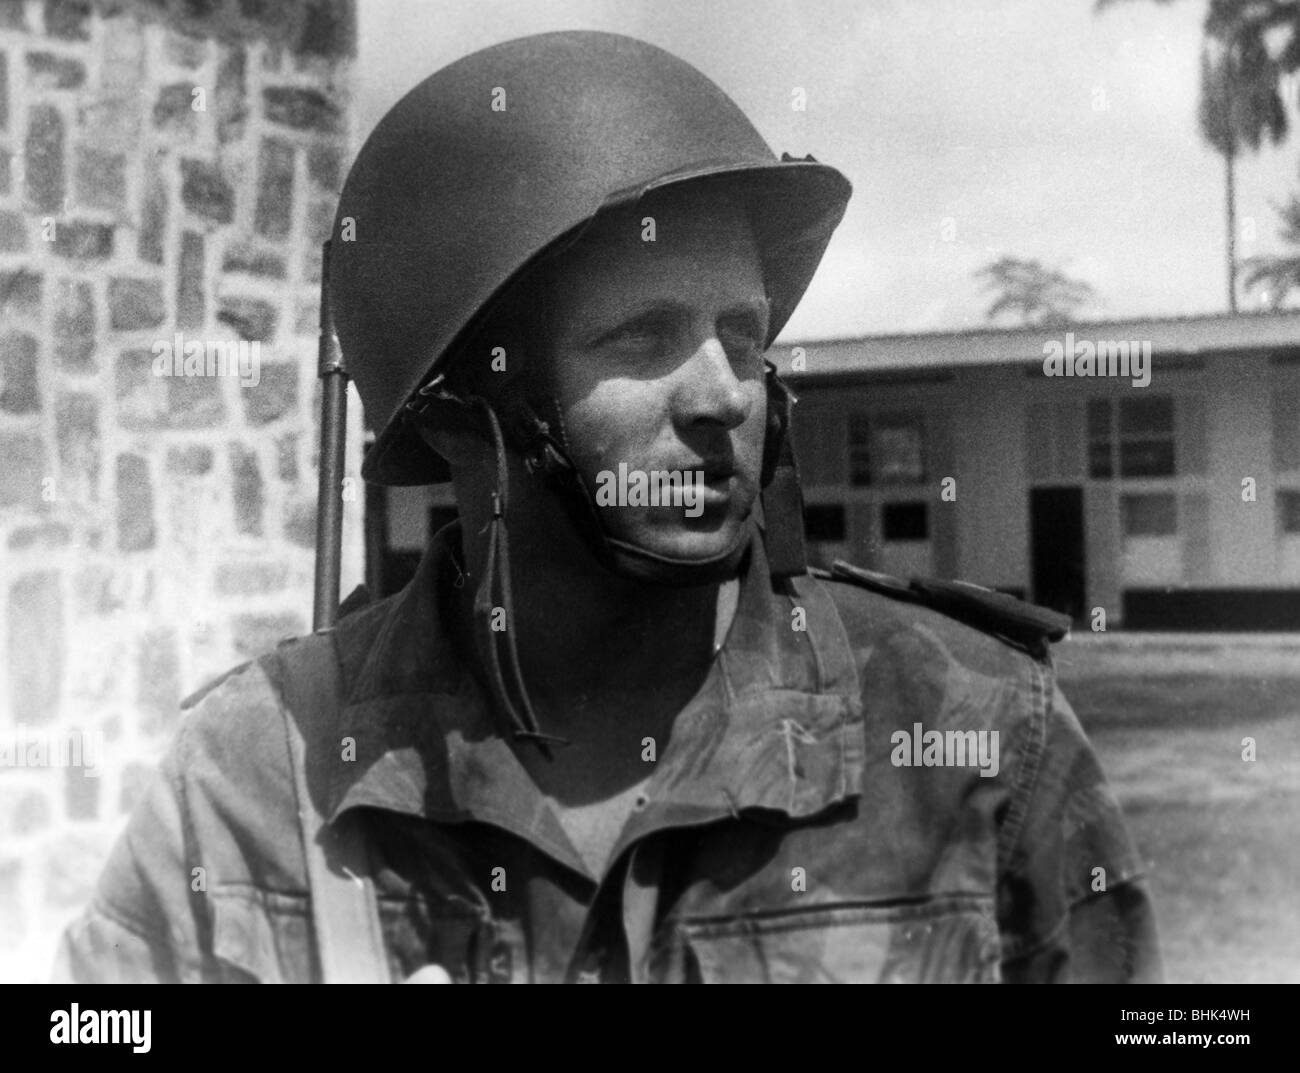 geography / travel, Congo, events, Simba uprising 1964 - 1965, mercenaries, Wilfried Schindler from Germany, 1964, military, Congo Crisis, civil war, Africa, Democratic Republic of Congo, 20th century, historic, historical, steel helmet, 1960s, people, Stock Photo